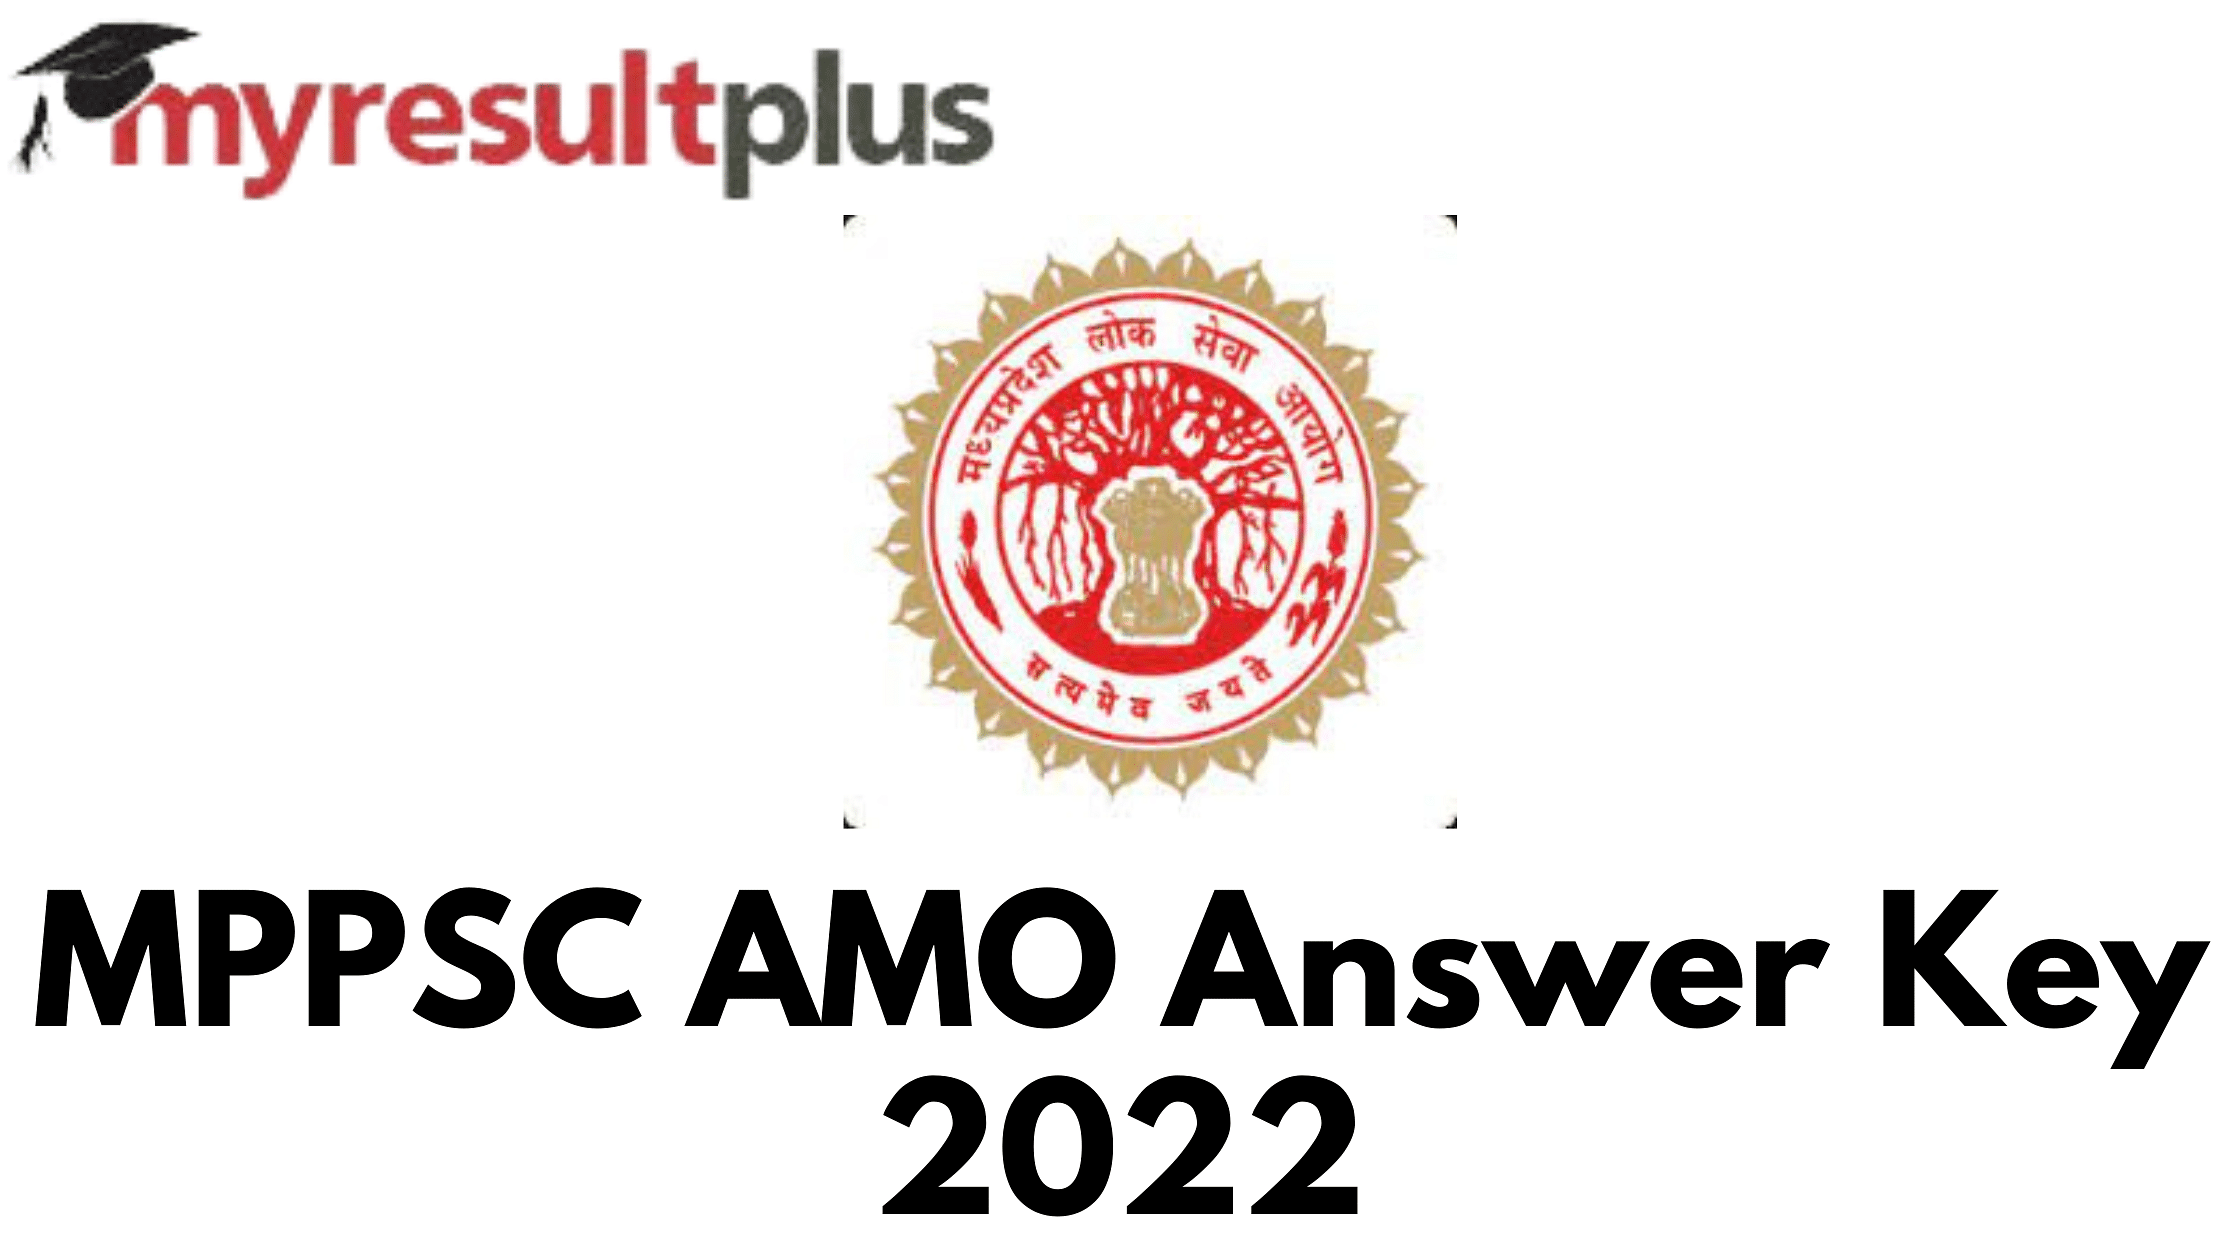 MPPSC AMO Answer Key 2022 Released, Know How to Download Here